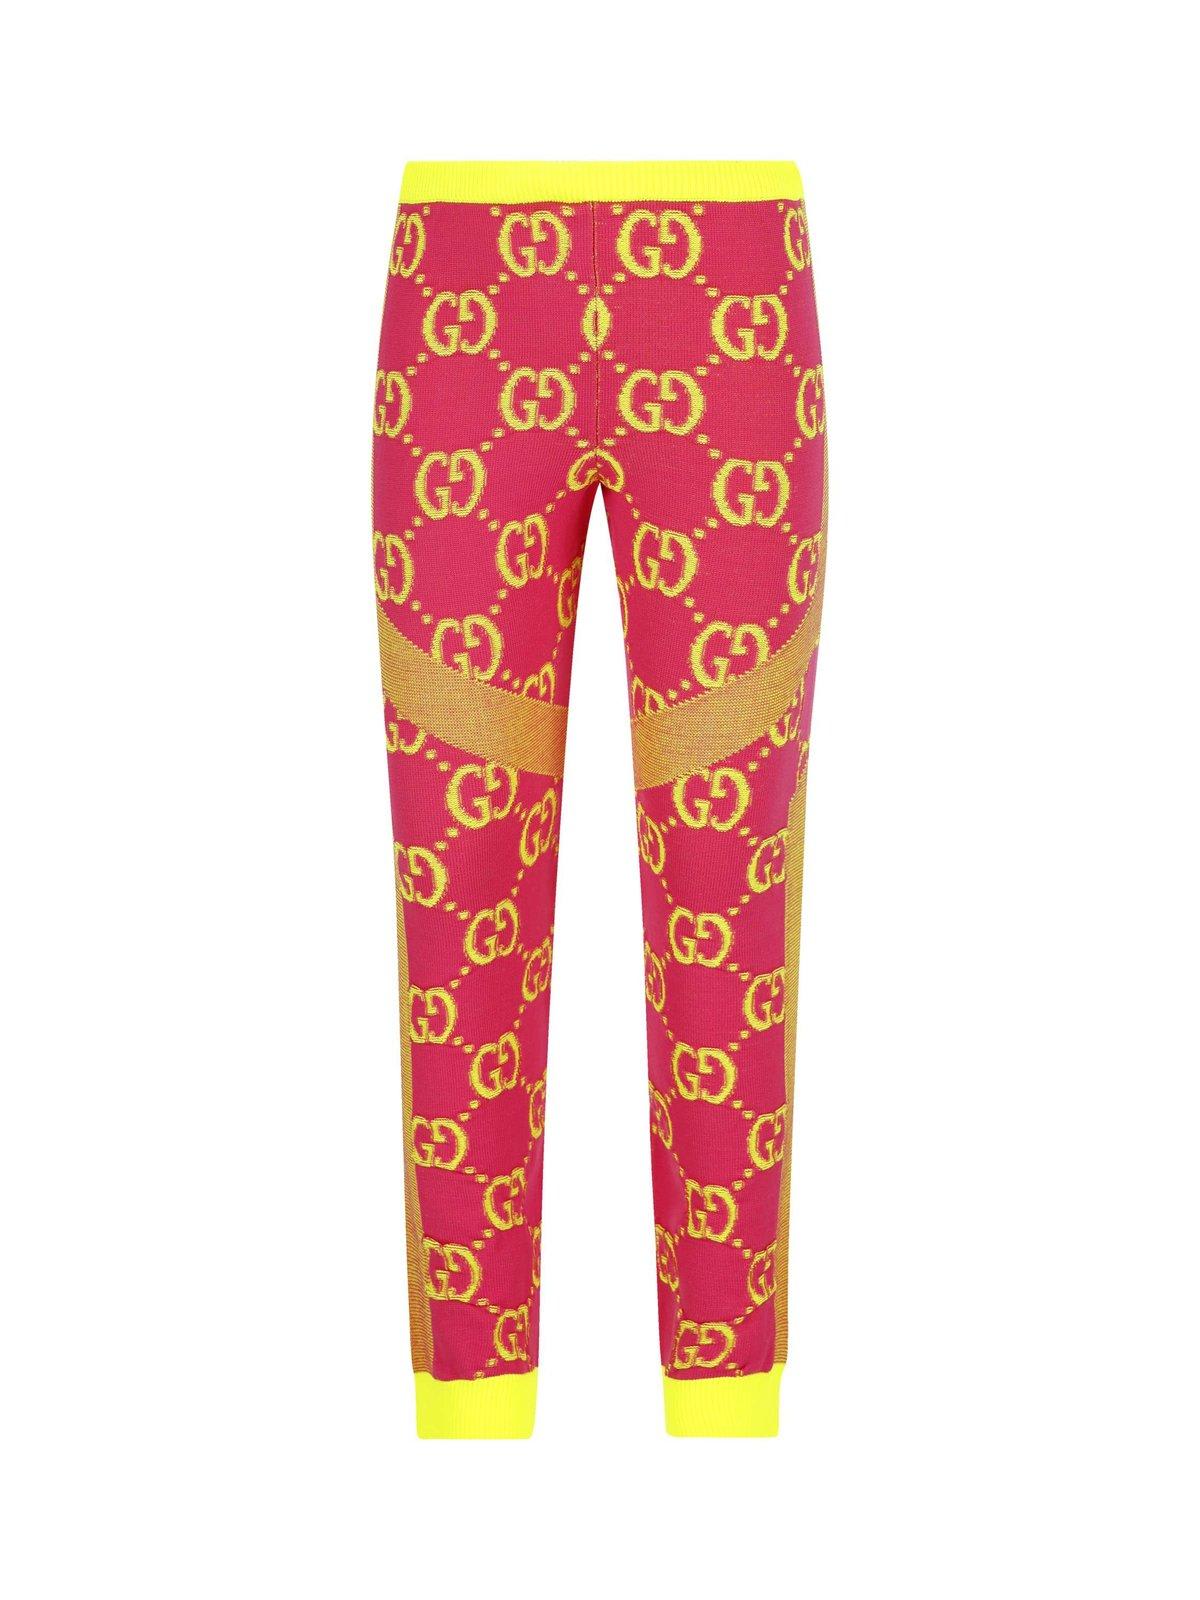 Gucci All-over Patterned Leggings